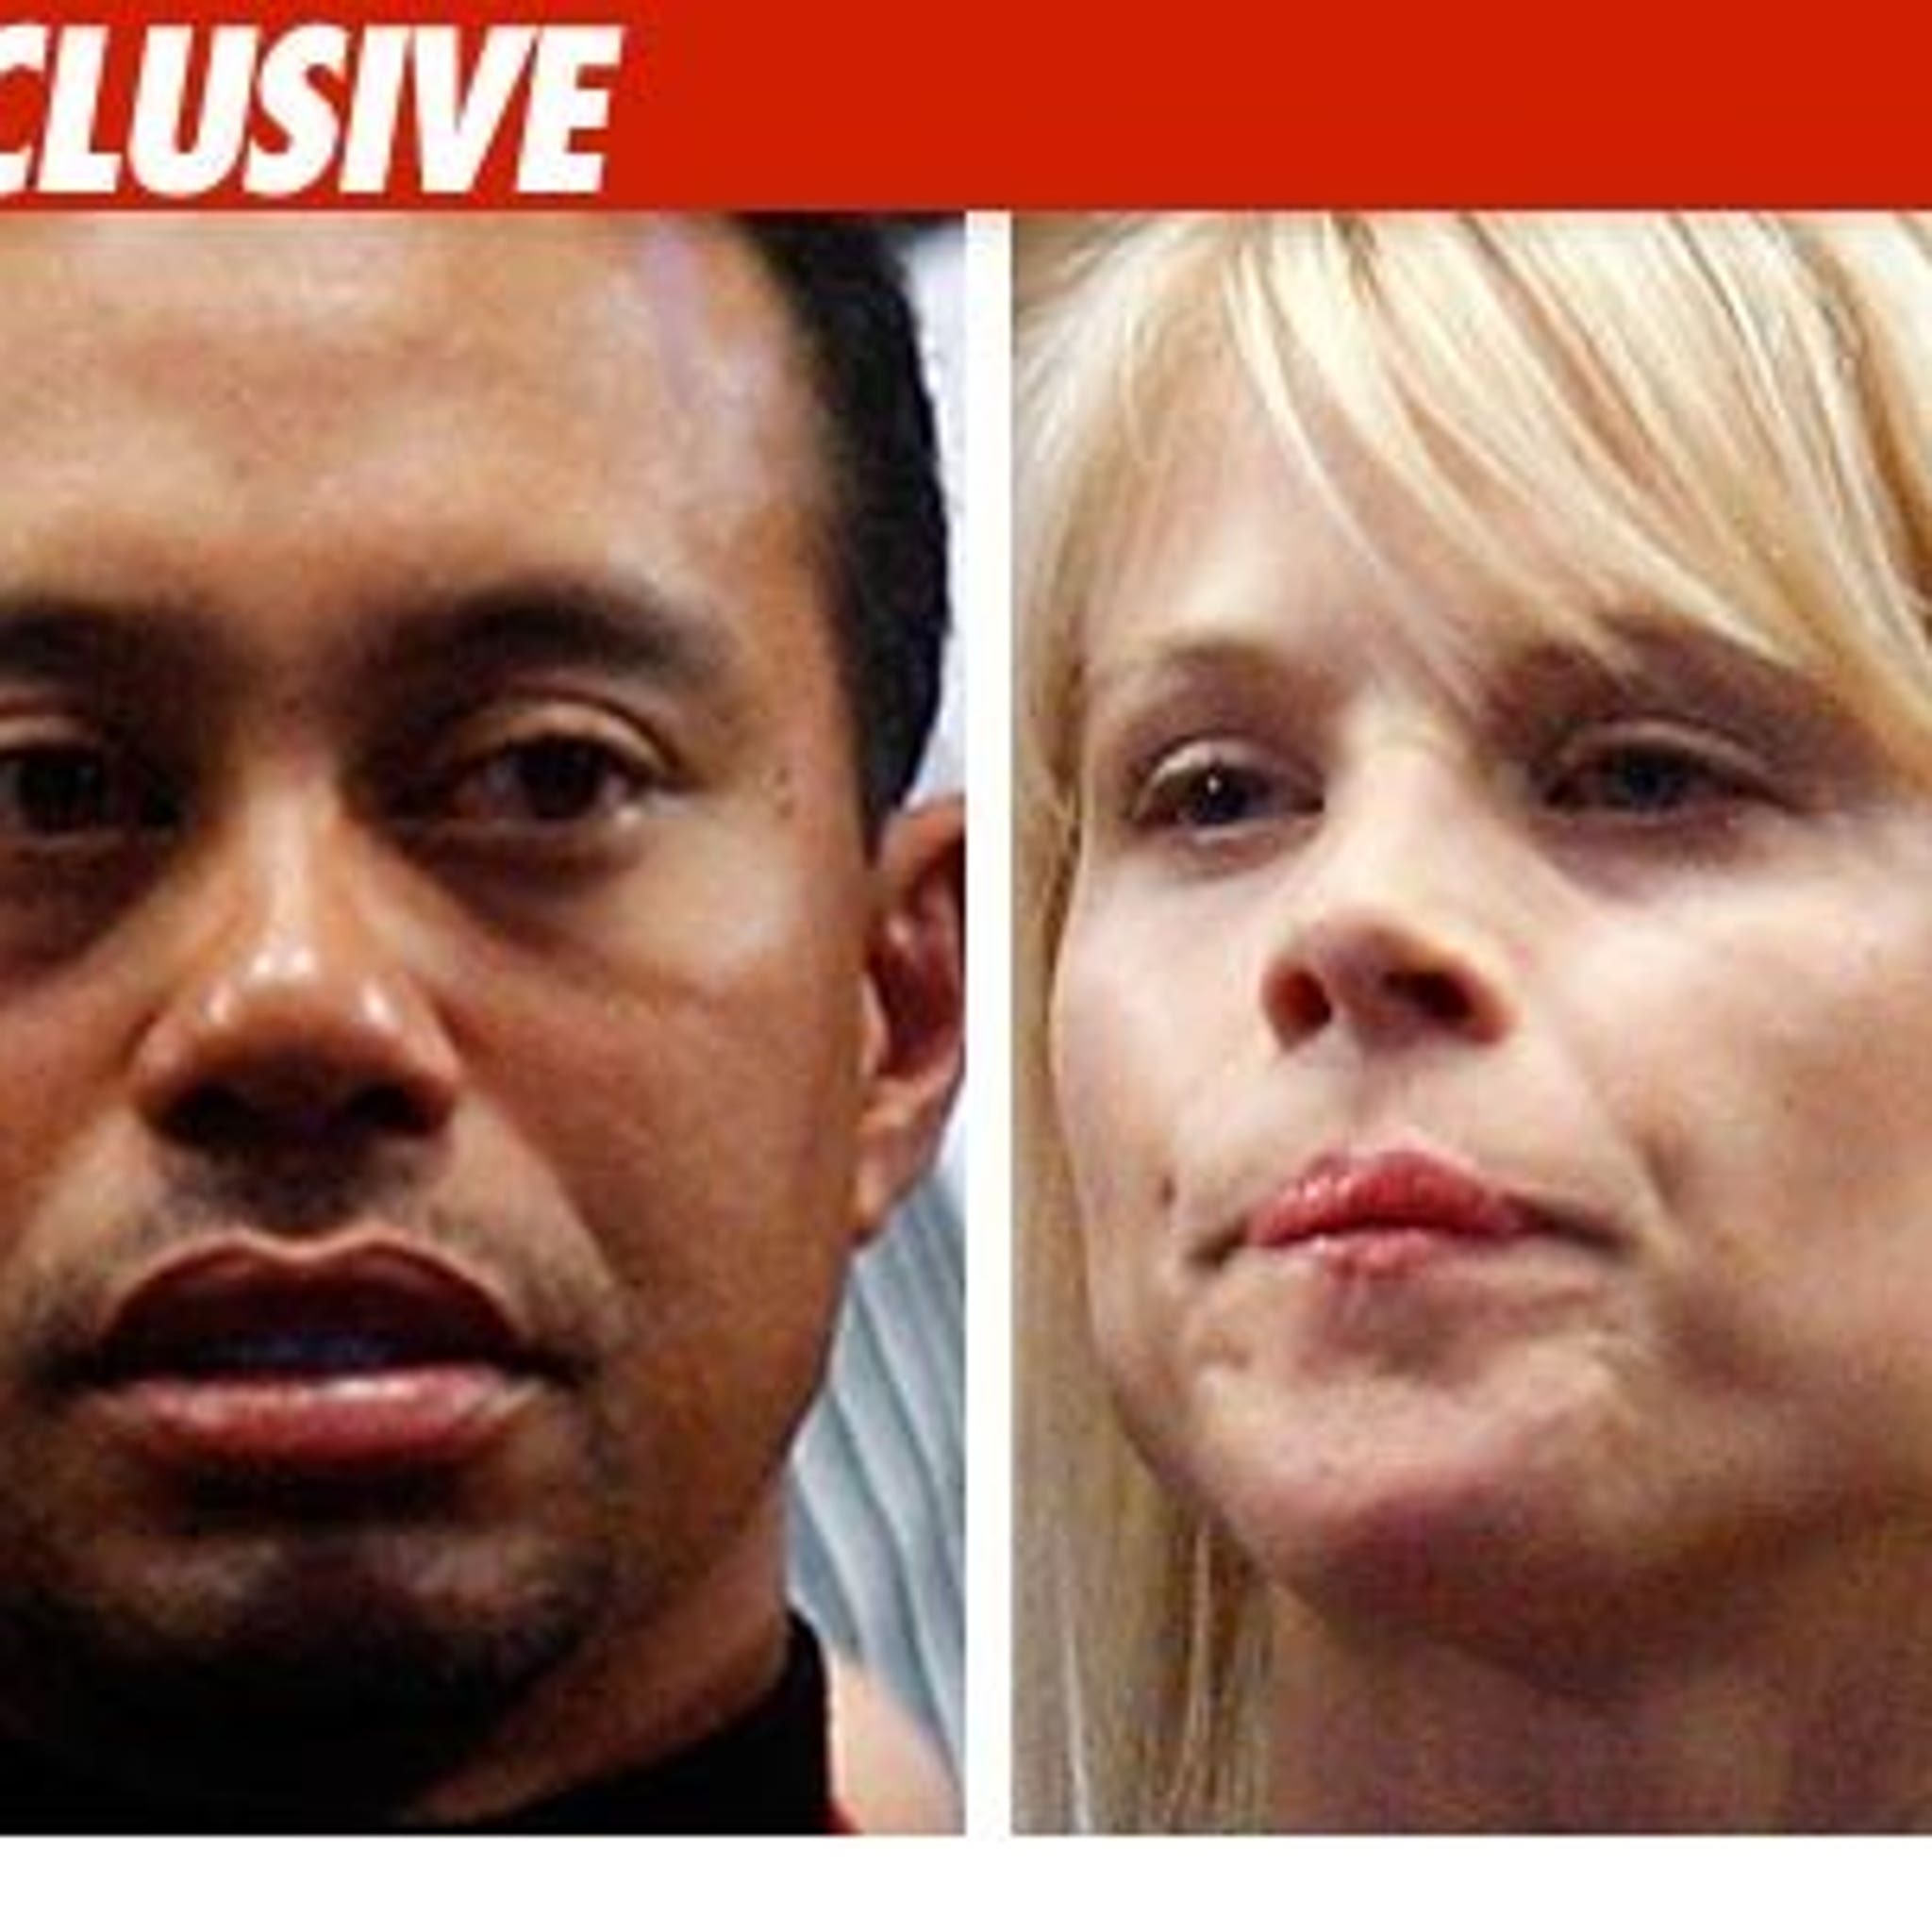 Tiger Woods Injuries Caused by Wife, Not photo